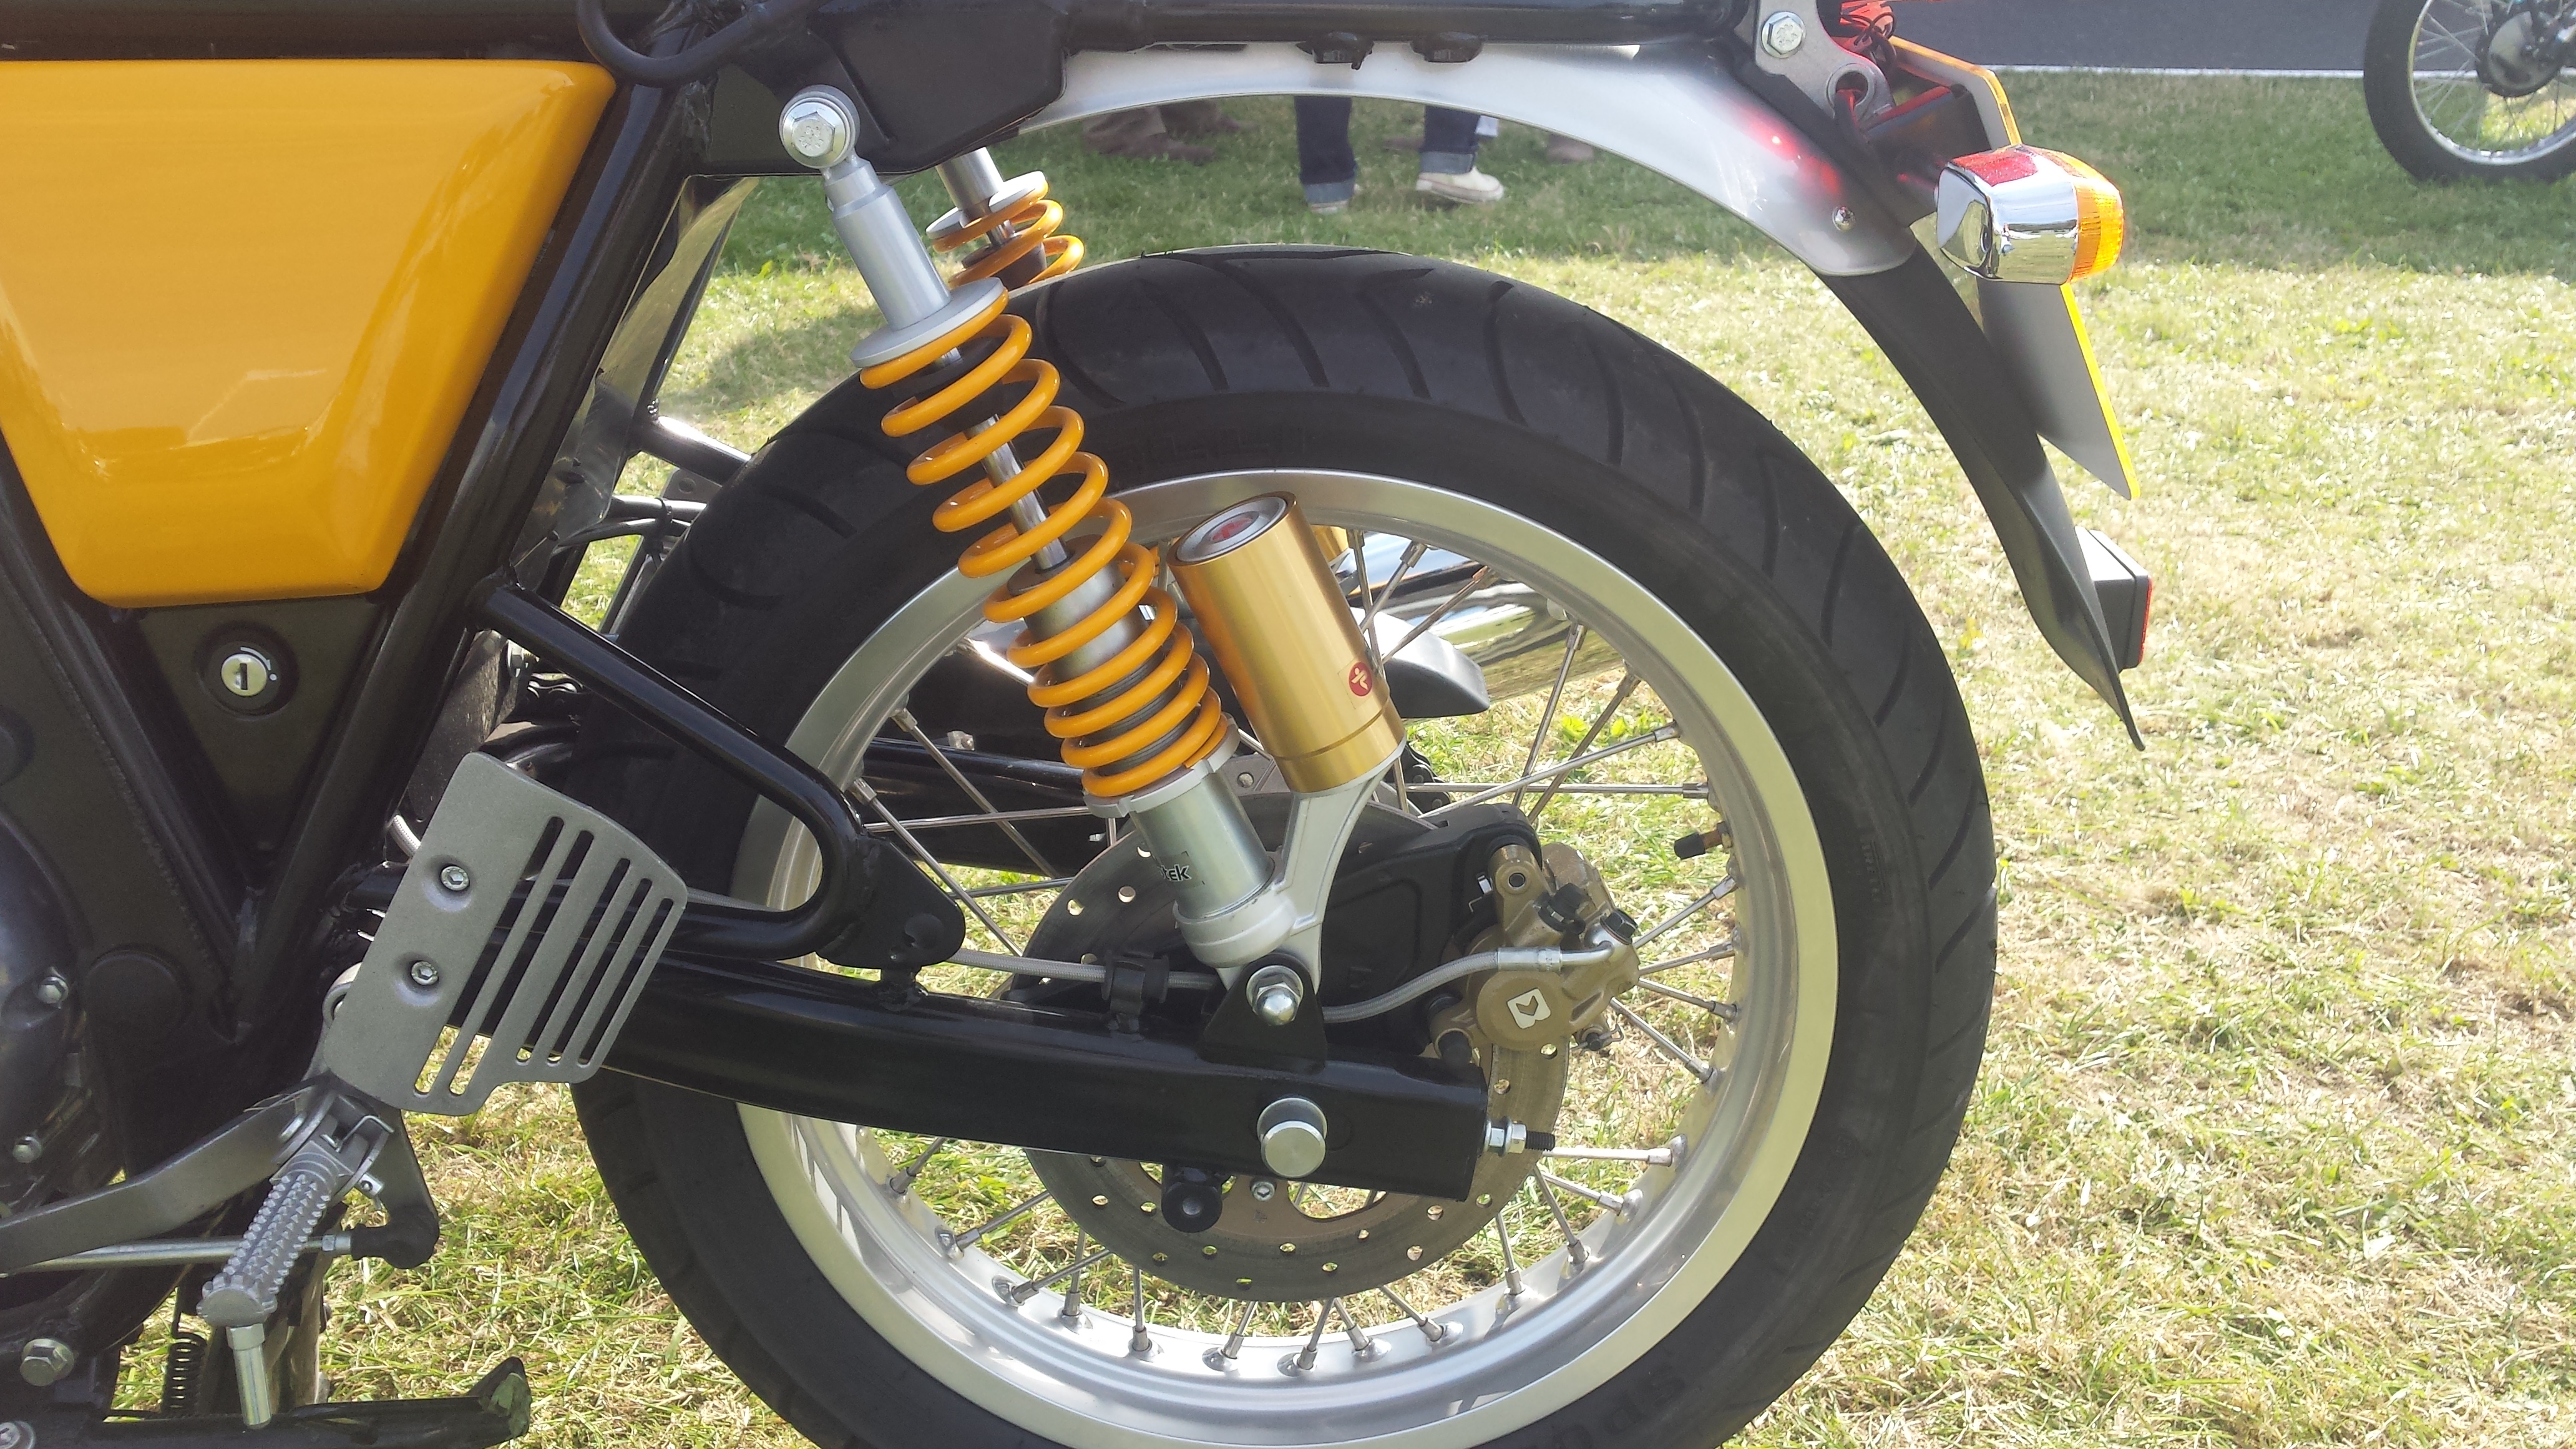 Road test: Royal Enfield Continental GT review